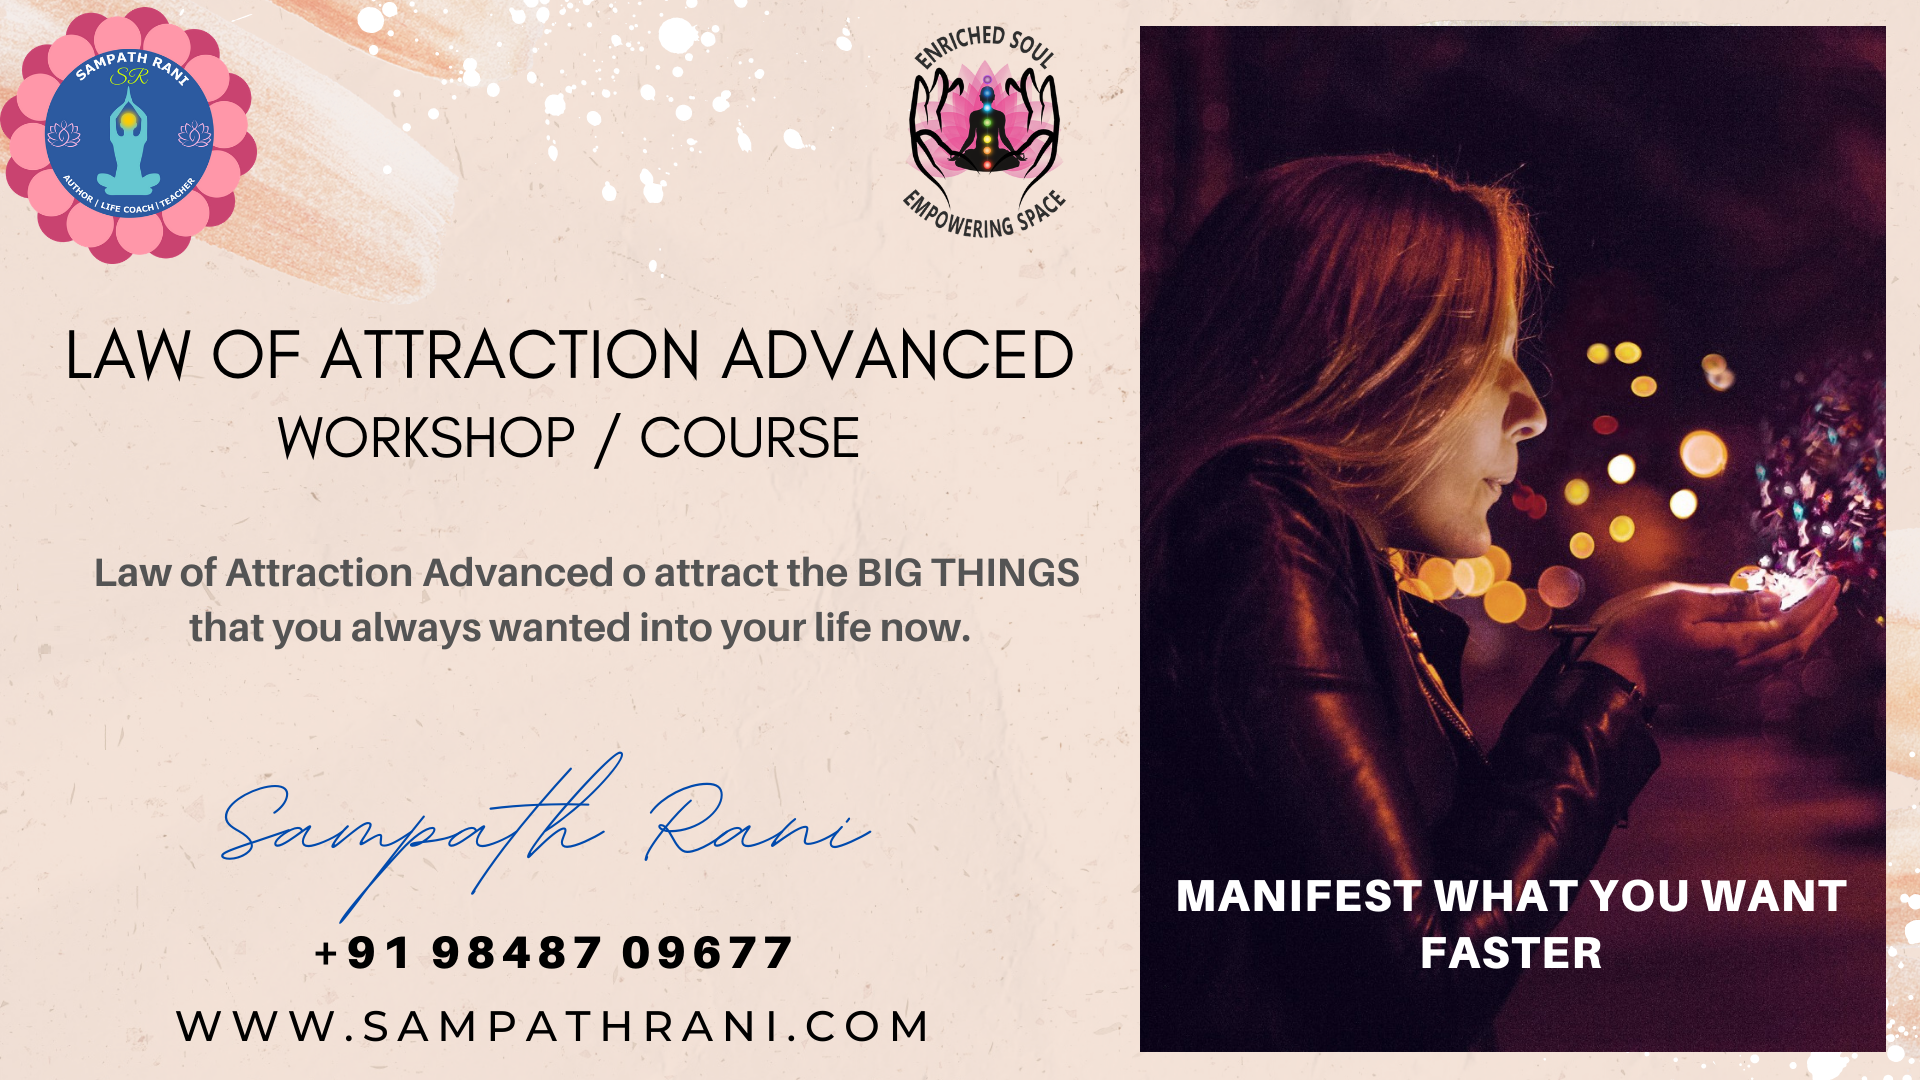 Law of Attraction Advanced Workshop, Course - by Sampath Rani - Bhopal